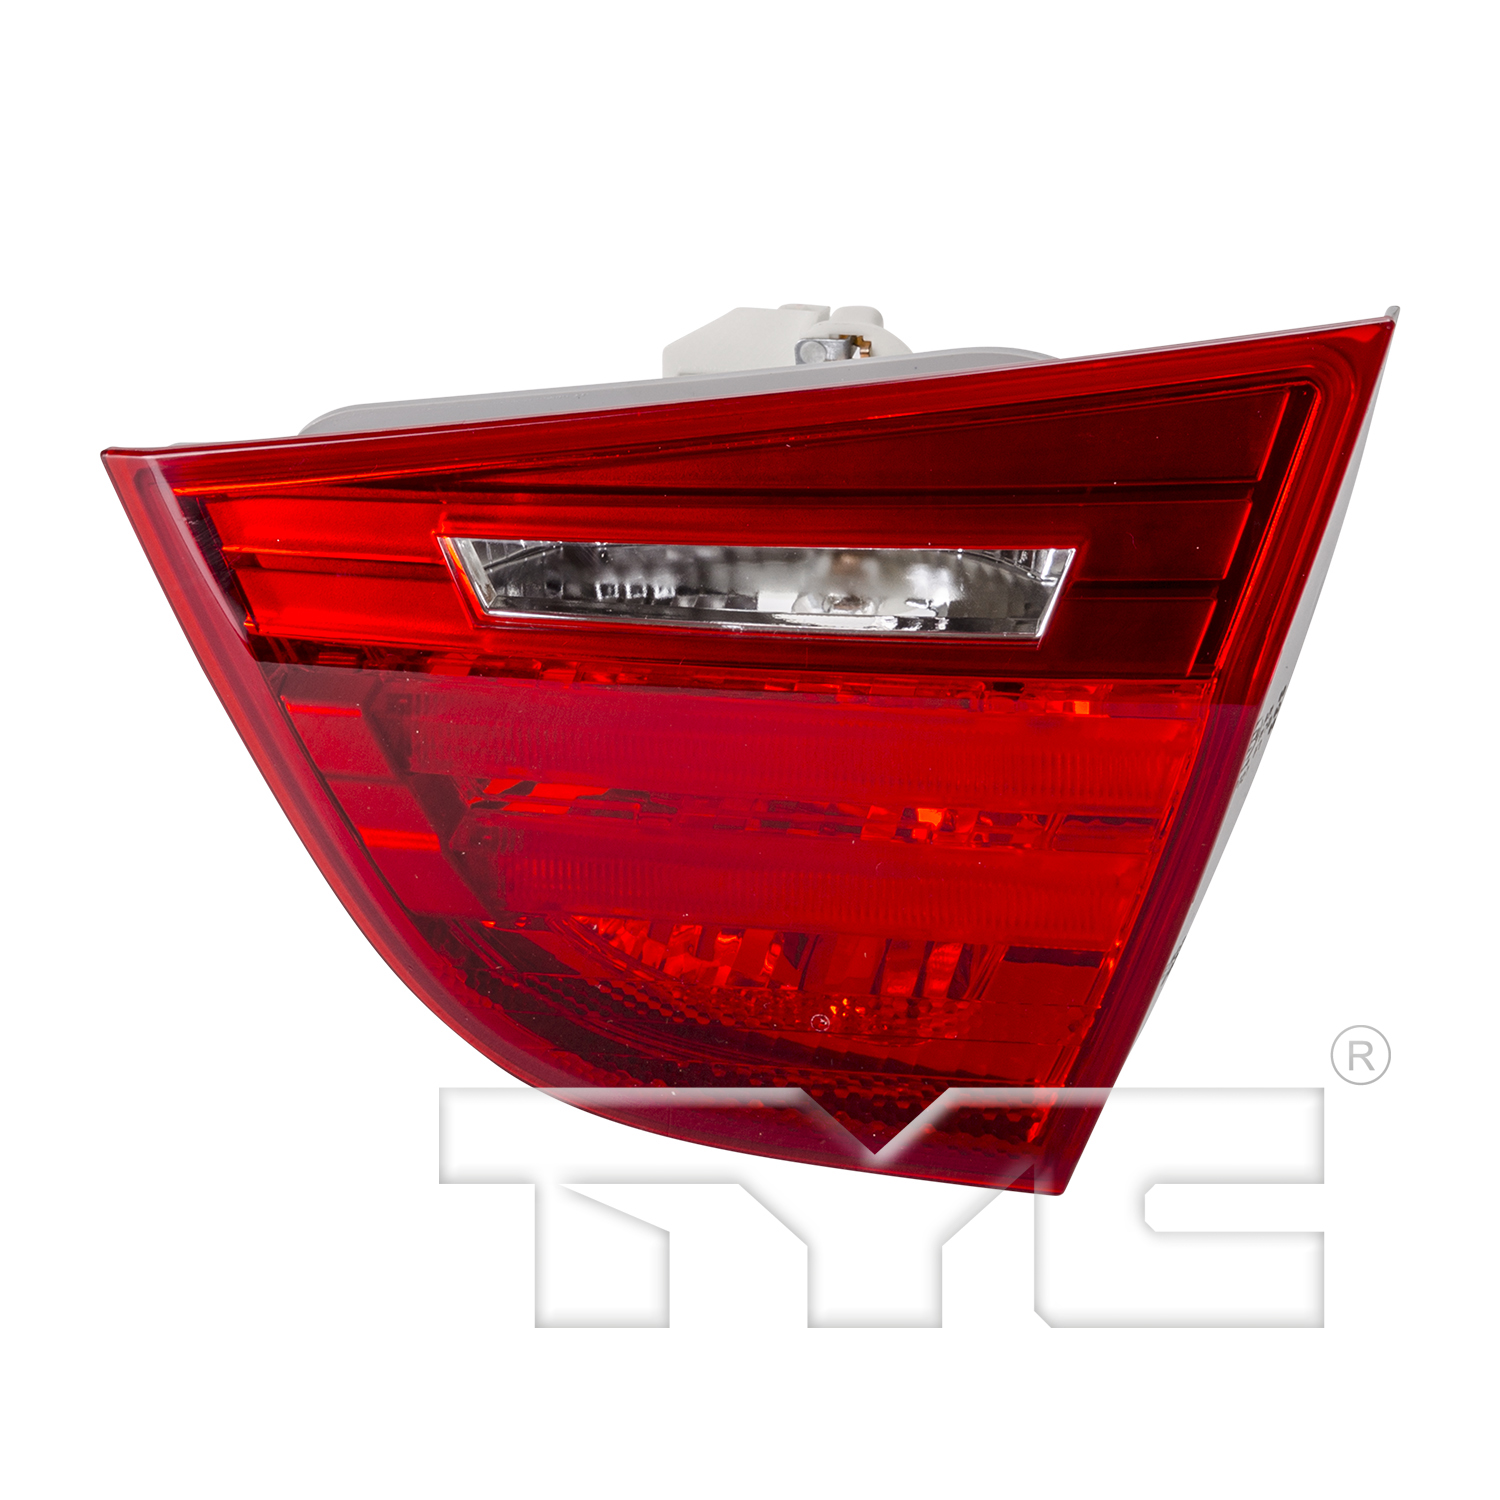 Aftermarket TAILLIGHTS for BMW - M3, M3,09-11,RT Taillamp assy inner